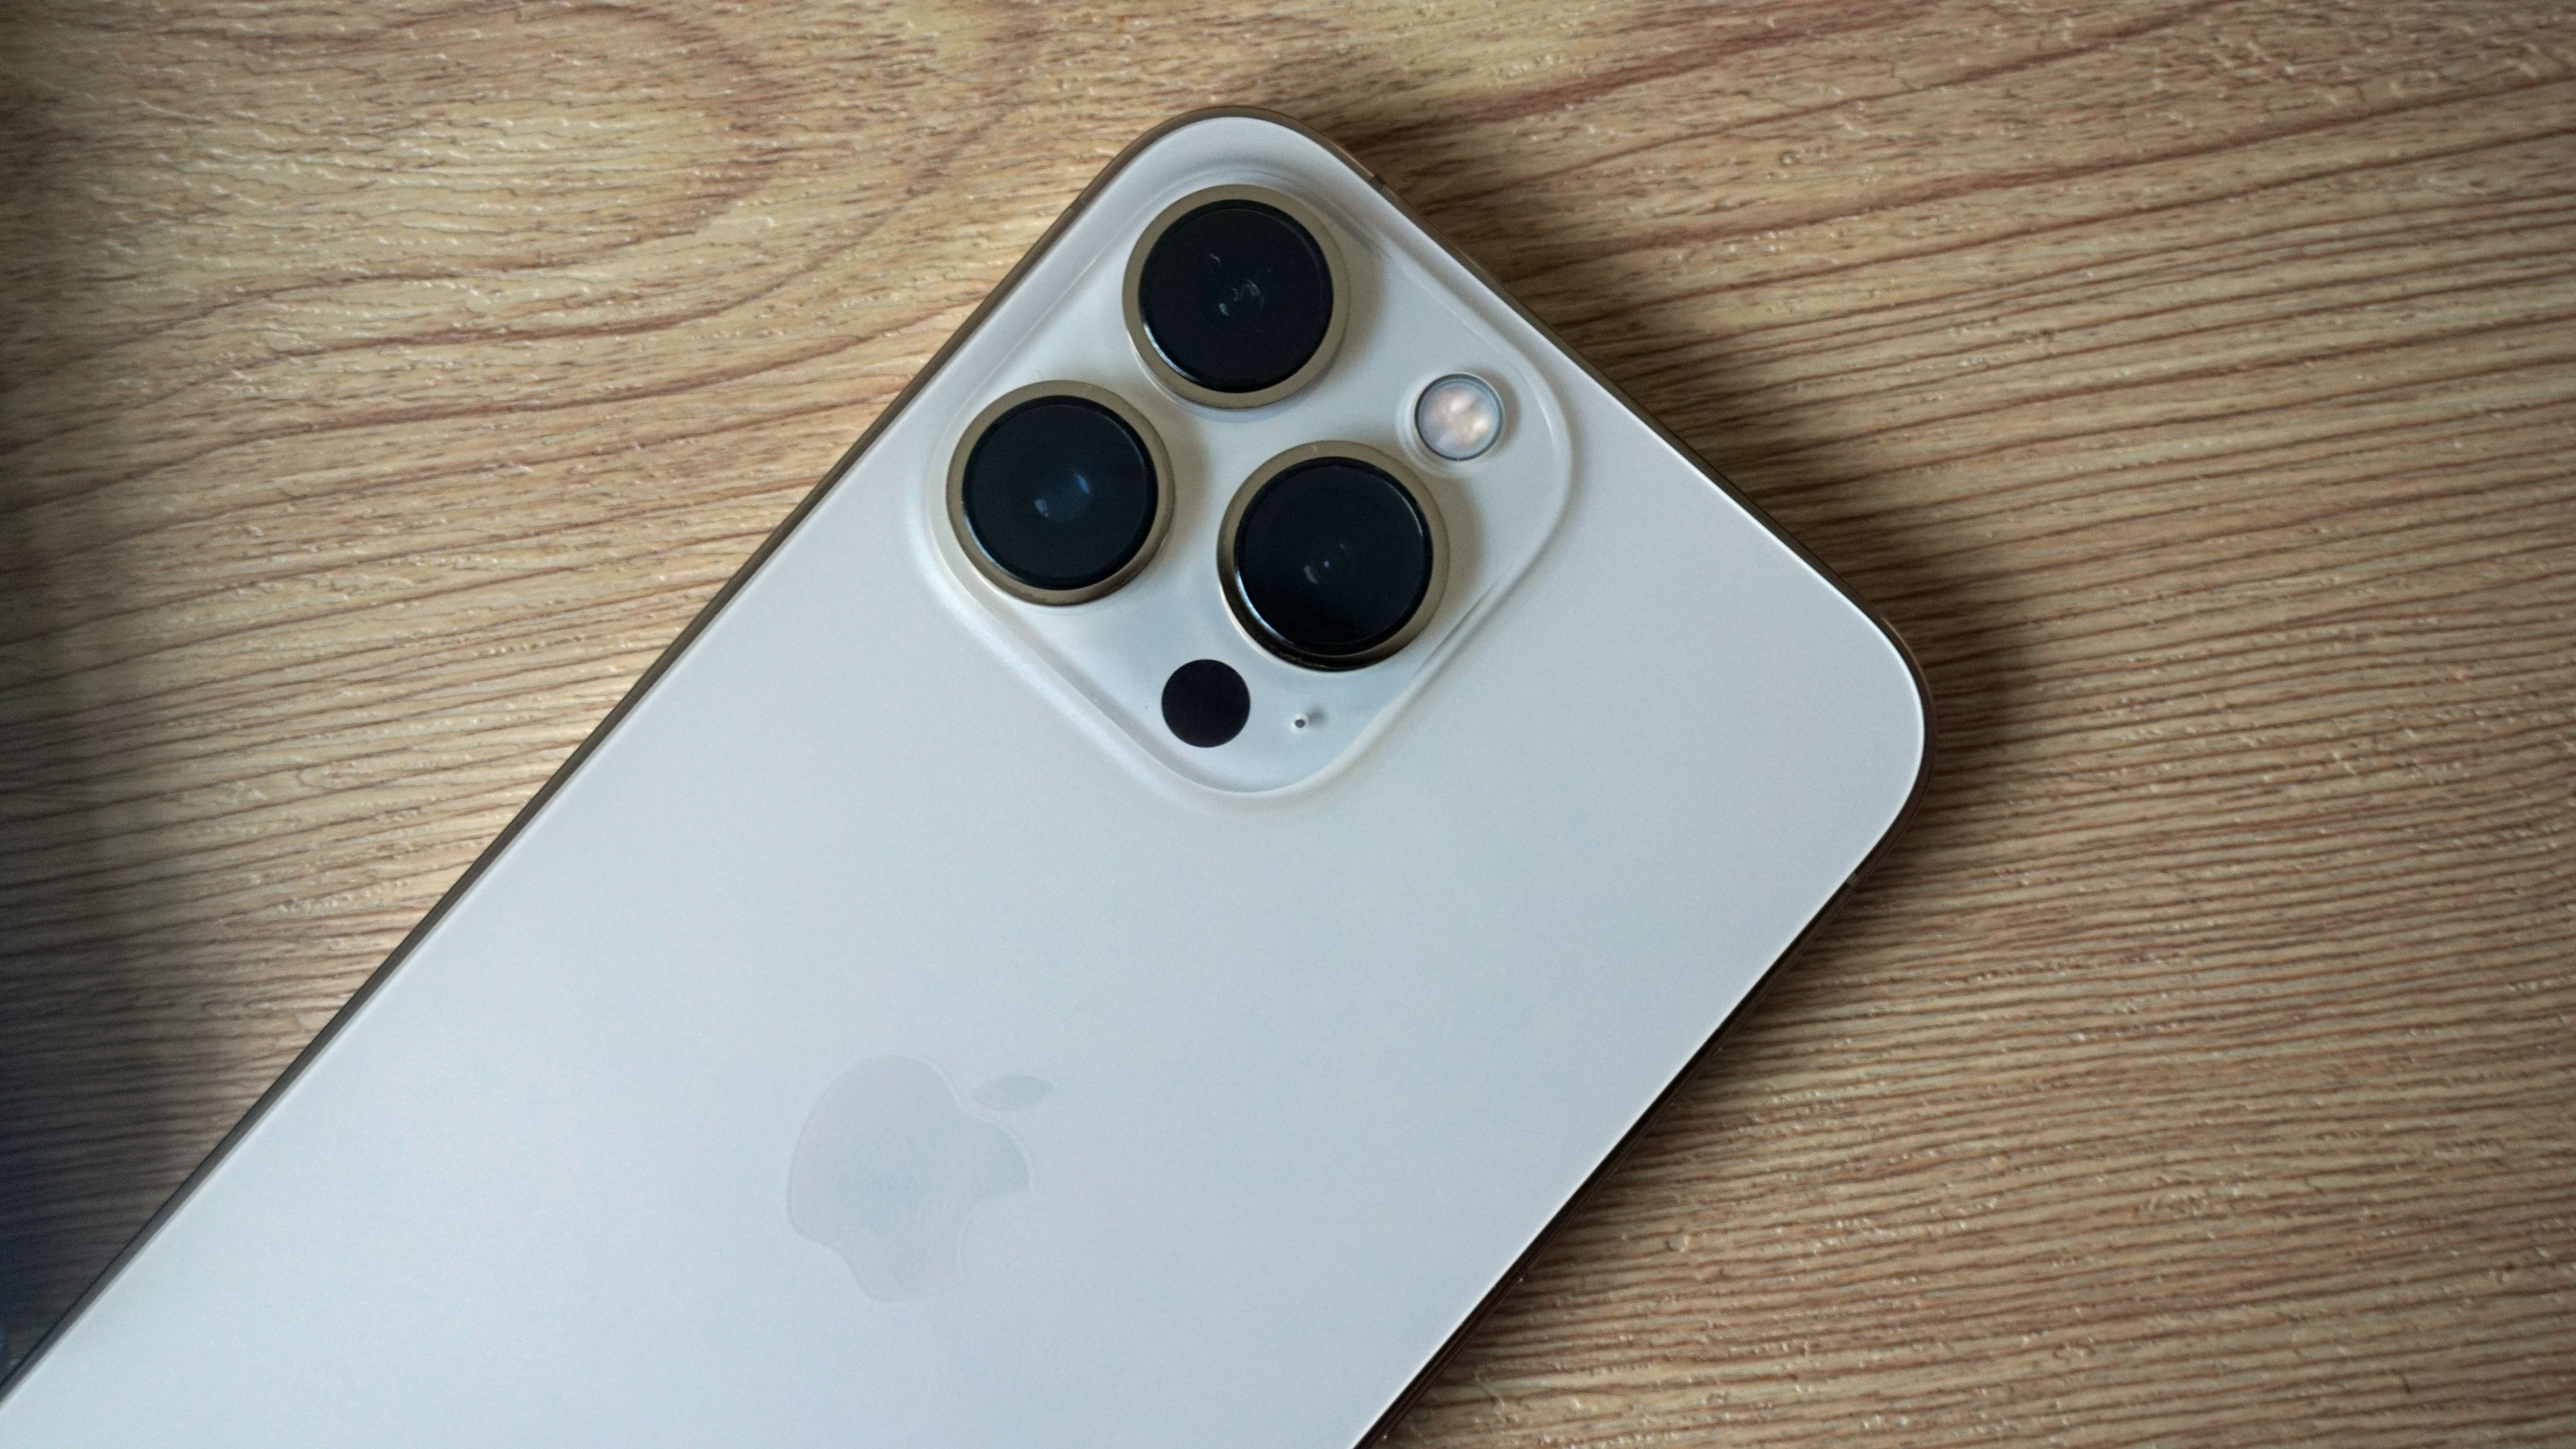 iPhone 14 Pro’s camera lenses look set to be much bigger than the iPhone 13 Pro’s